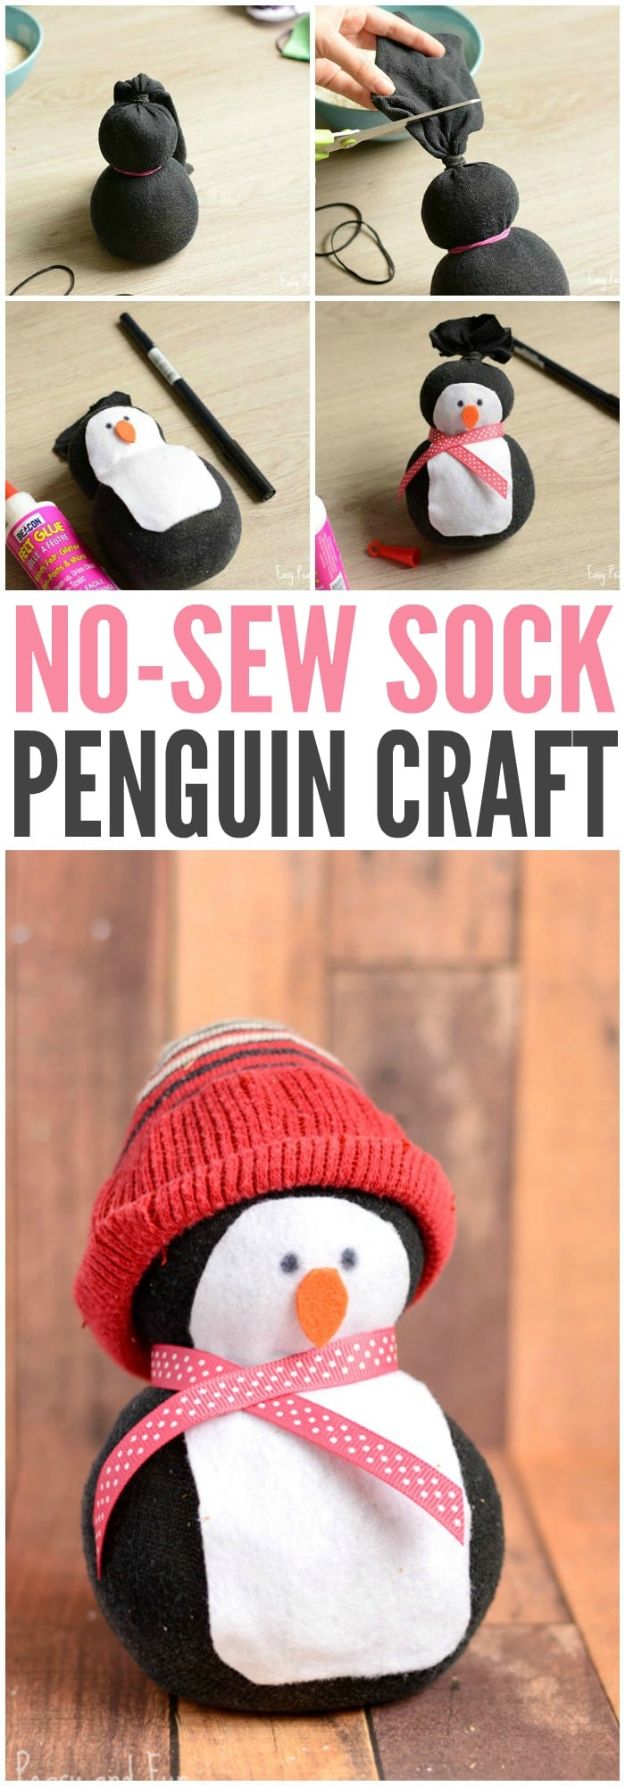 Crafts for Teens to Make and Sell - No-Sew Sock Penguin Craft - Cheap and Easy DIY Ideas To Make For Extra Money - Best Things to Sell On Etsy, Dollar Store Craft Ideas, Quick Projects for Teenagers To Make Spending Cash - DIY Gifts, Wall Art, School Supplies, Room Decor, Jewelry, Fashion, Hair Accessories, Bracelets, Magnets #teencrafts #craftstosell #etsyideass